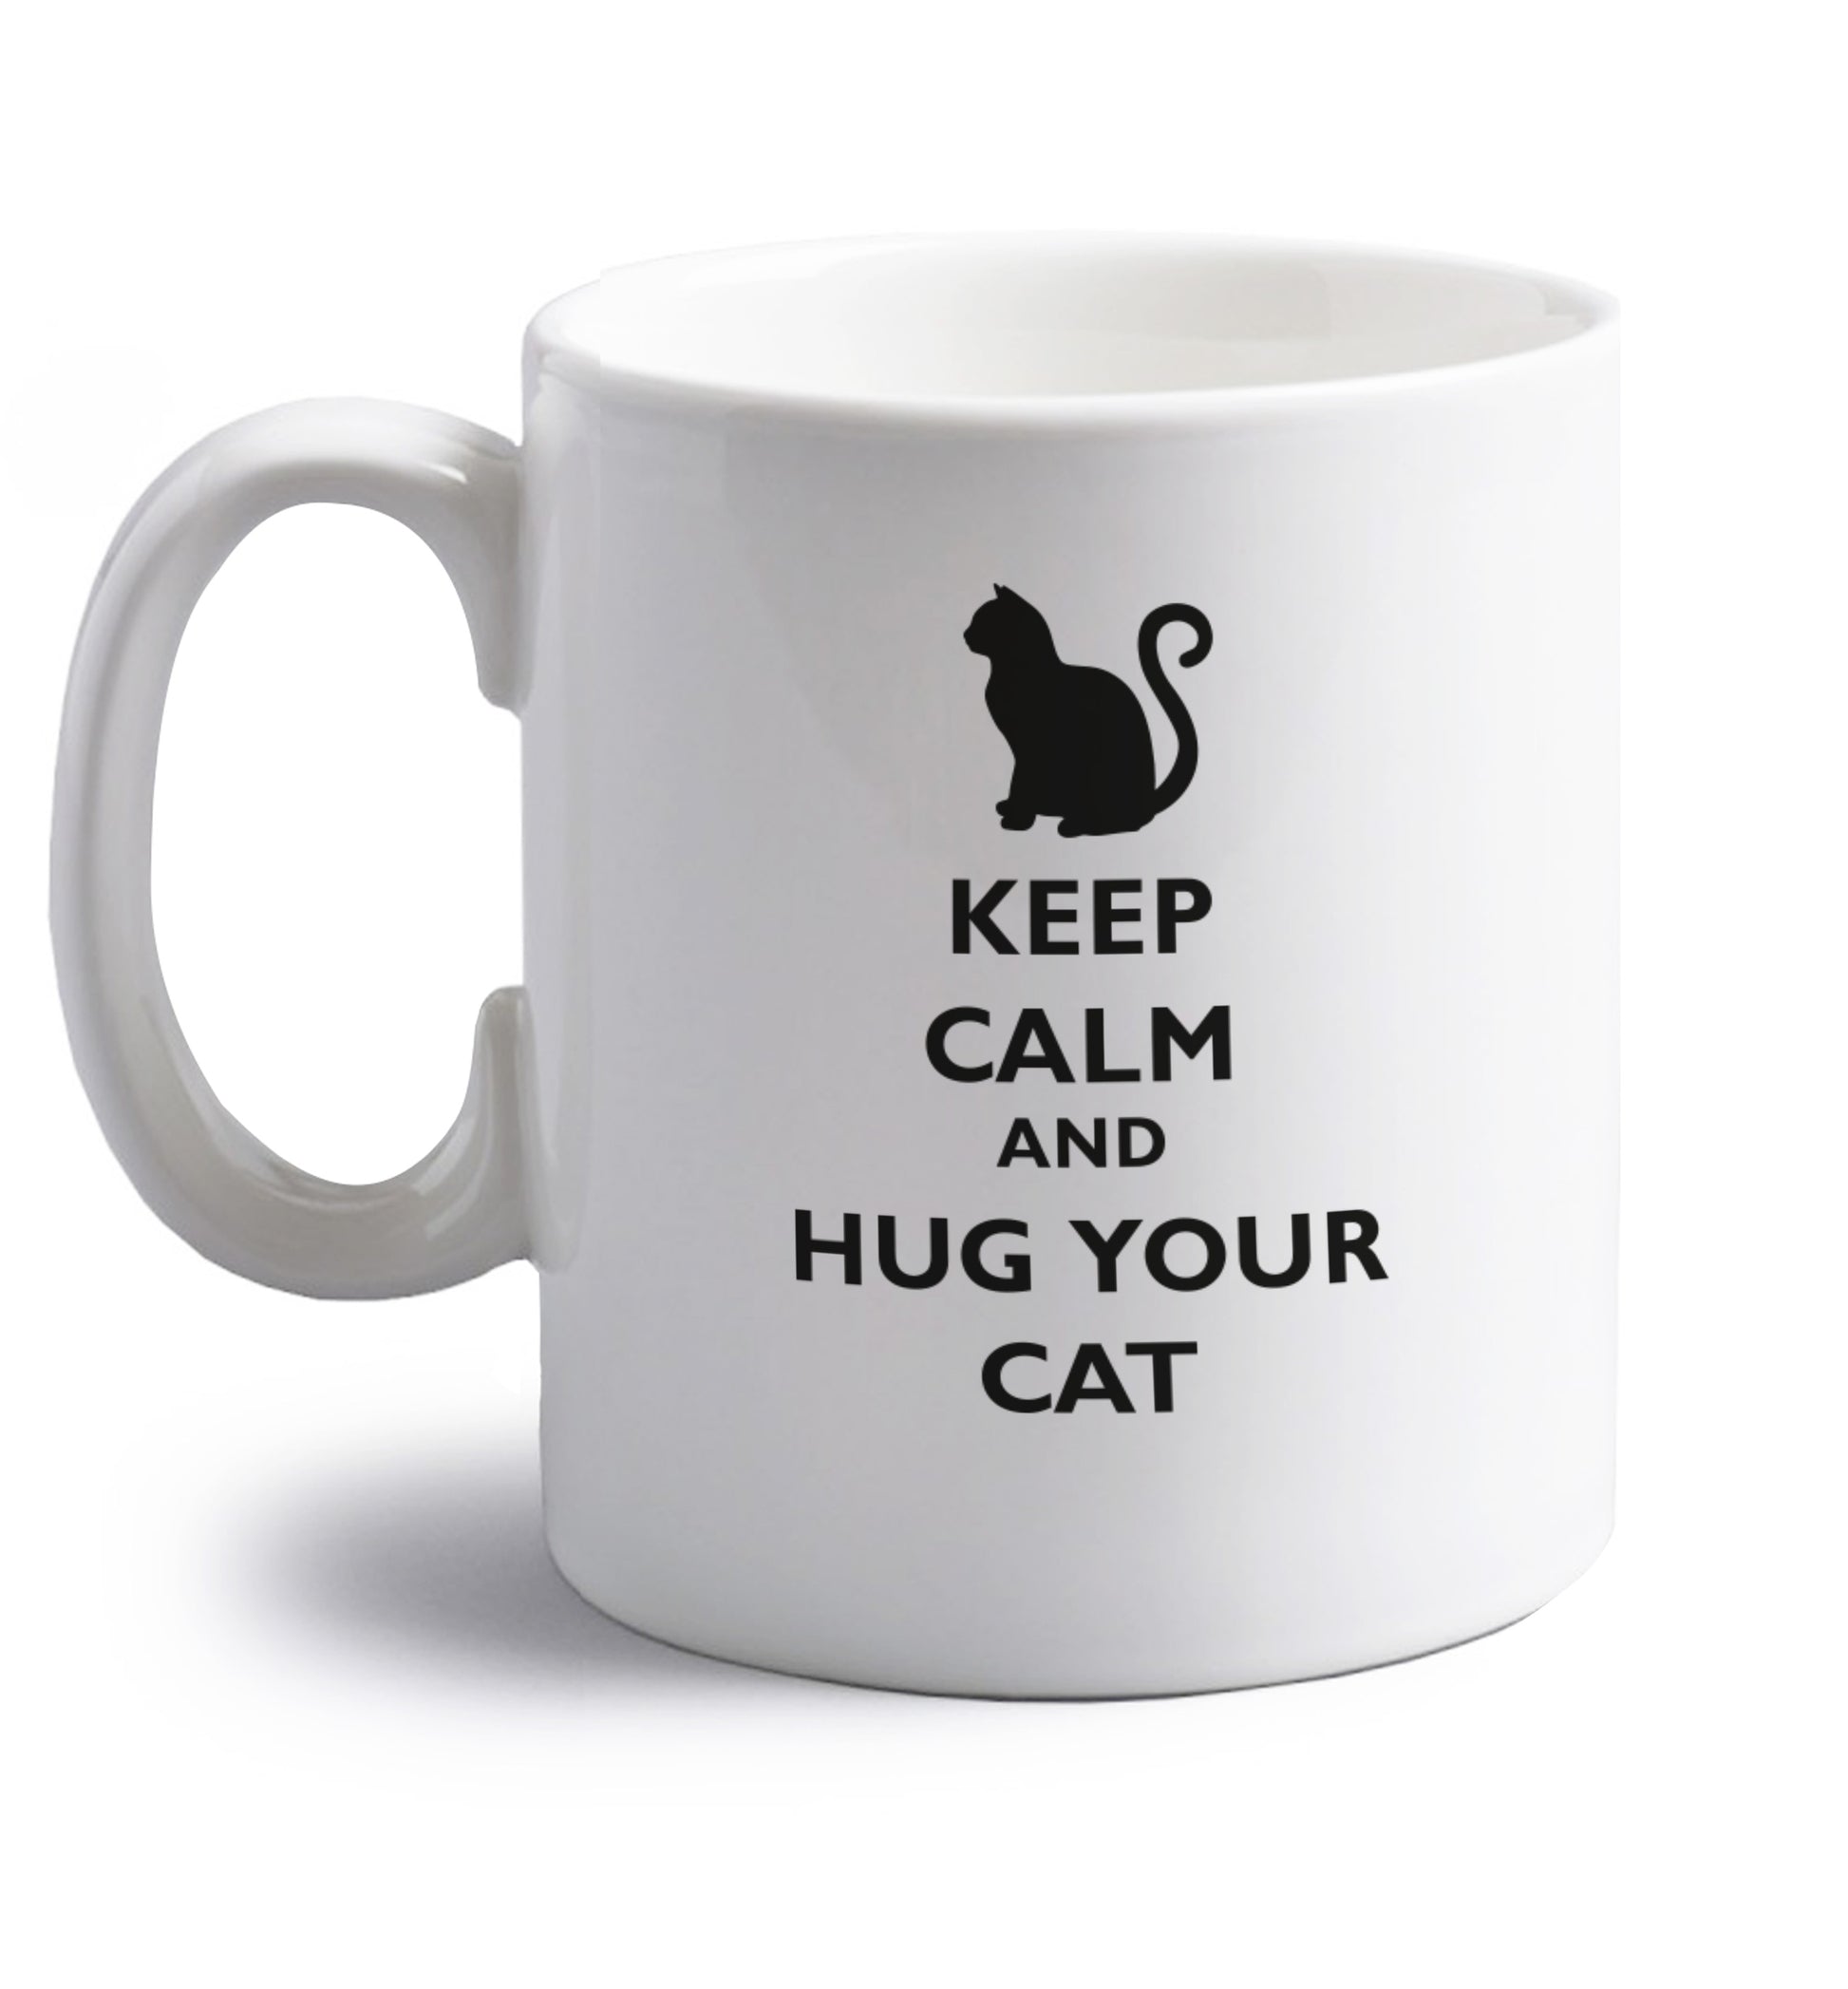 Keep calm and hug your cat right handed white ceramic mug 